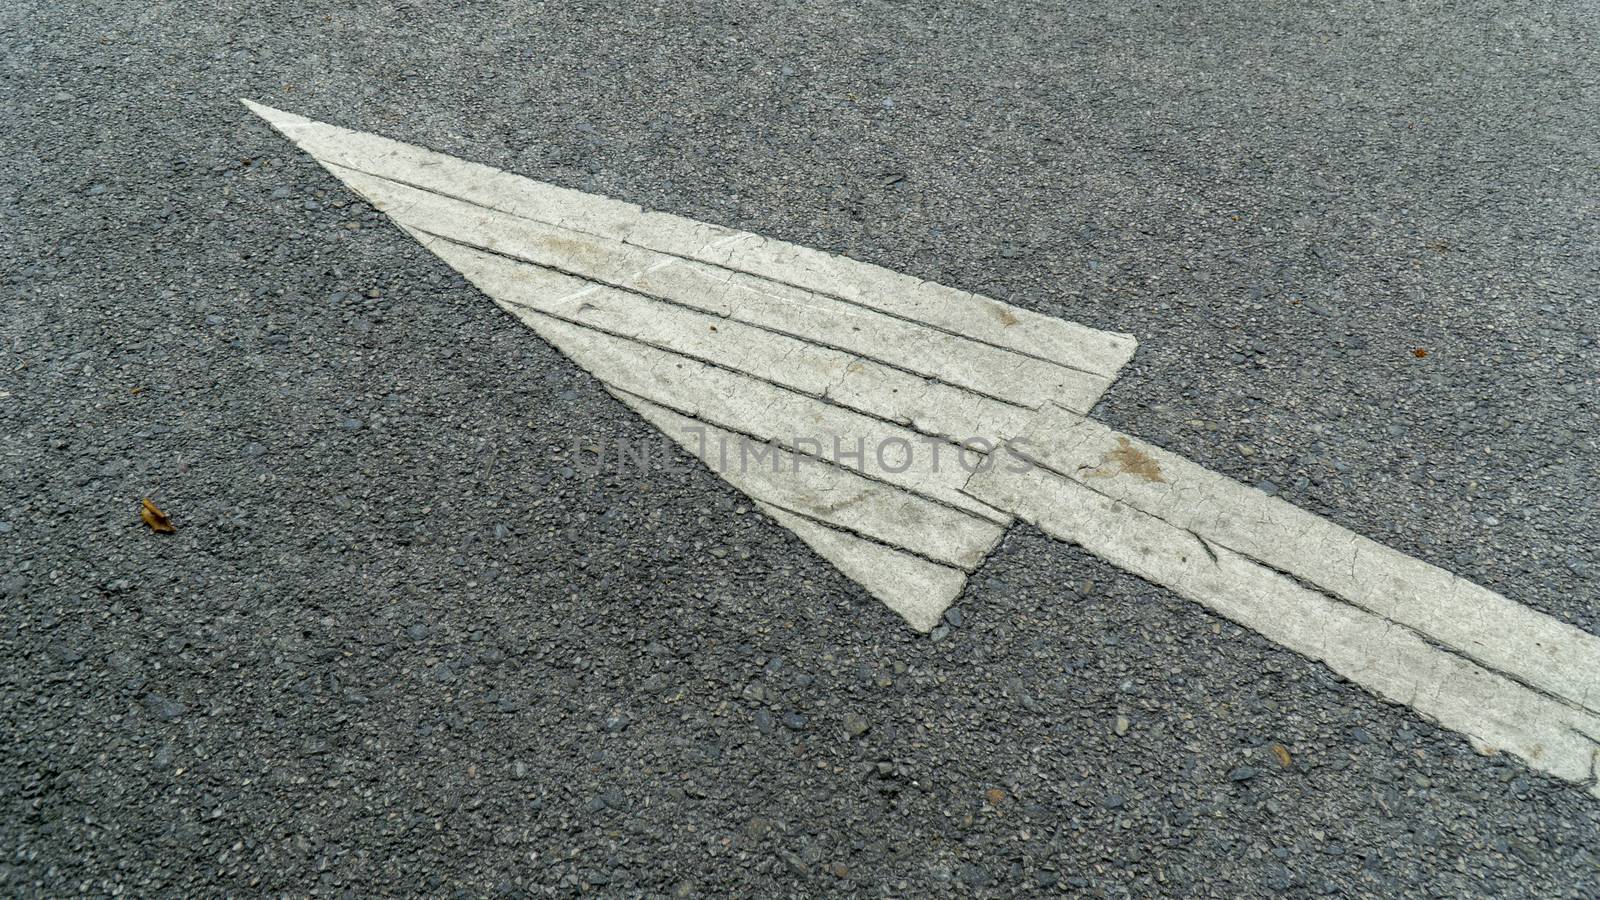 A white arrow painted sign on a gray paved road pointing the direction the car was supposed to drive. by sonandonures